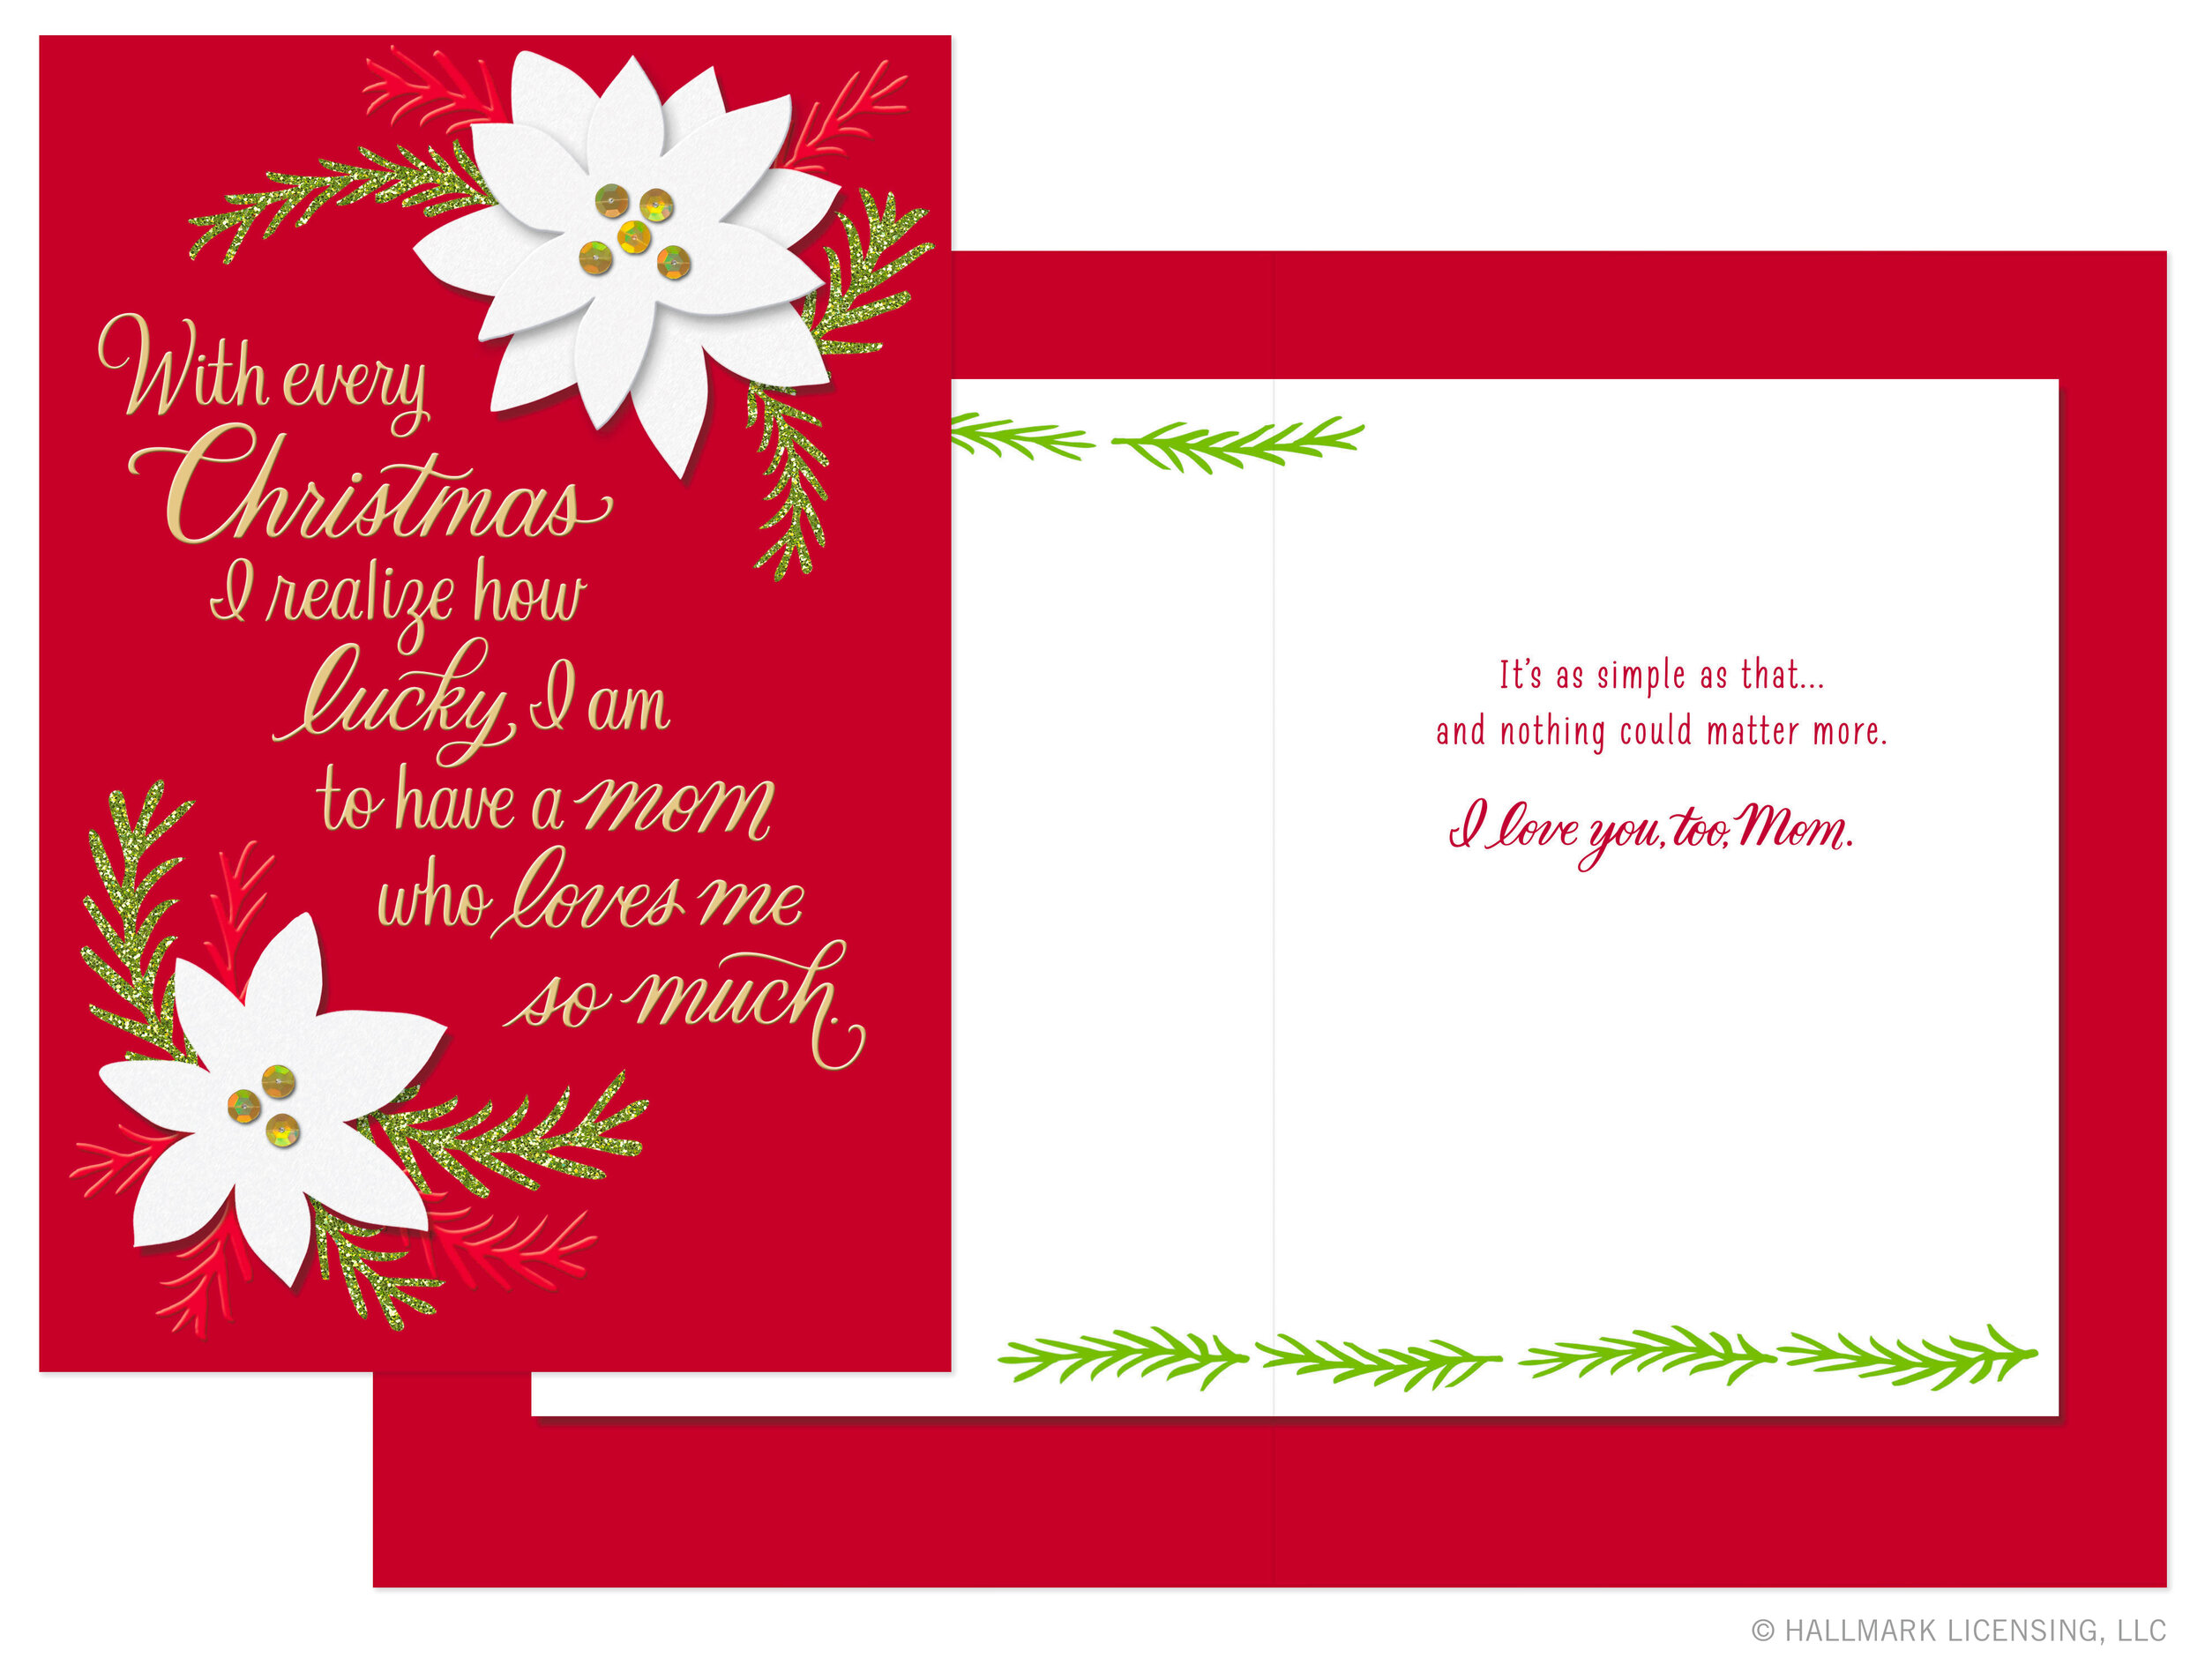 Copy of Letters Are Lovely | Greeting Cards for Hallmark